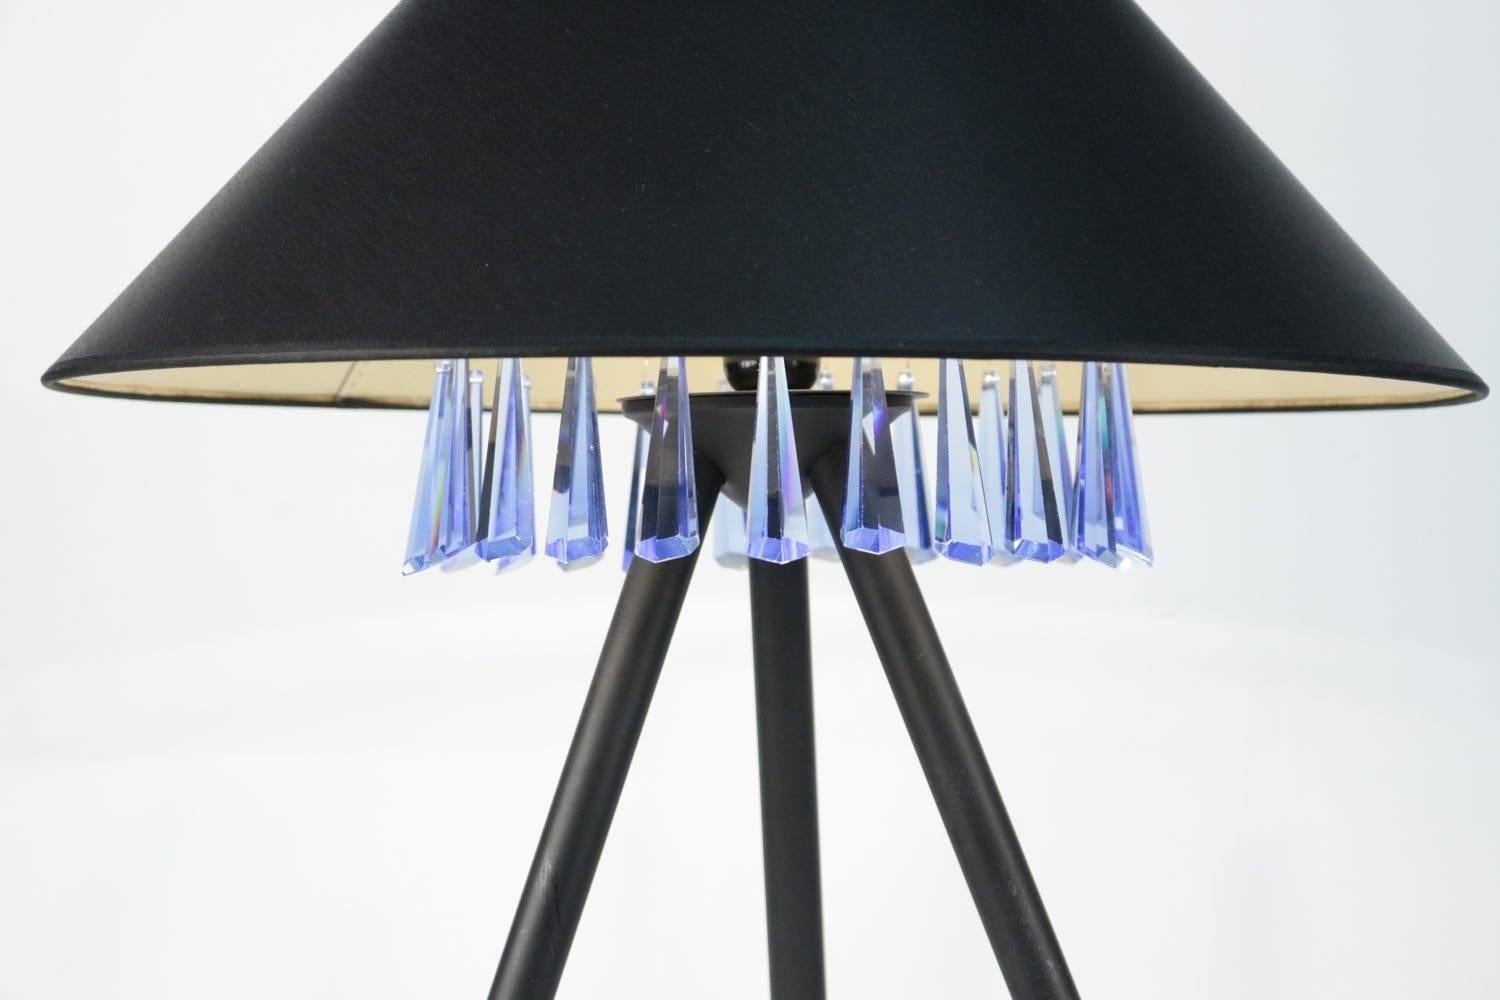 1970s table lamp by Chrystiane Charles, 1970 from Maison Charles.
Referenced in the catalog.
Composed of a black lacquered metal tripod of rounded section placed on 3 small golden brass balls.
On the upper part, a frieze decorated with blue glass